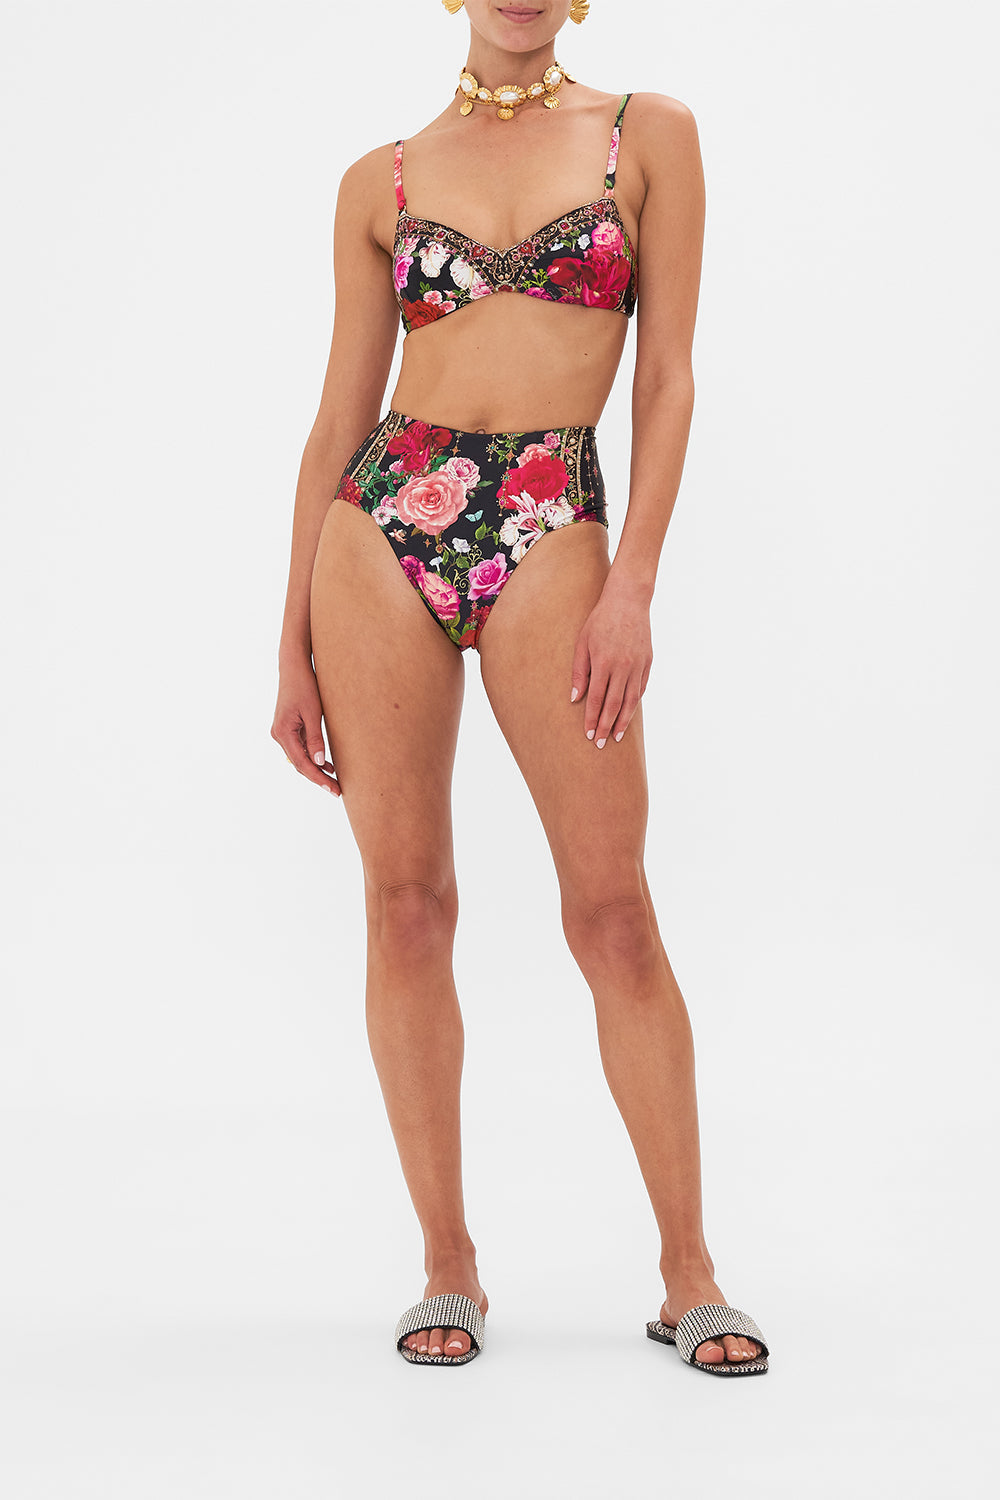 Front view of model wearing CAMILLA floral bra in Reservation For Love print